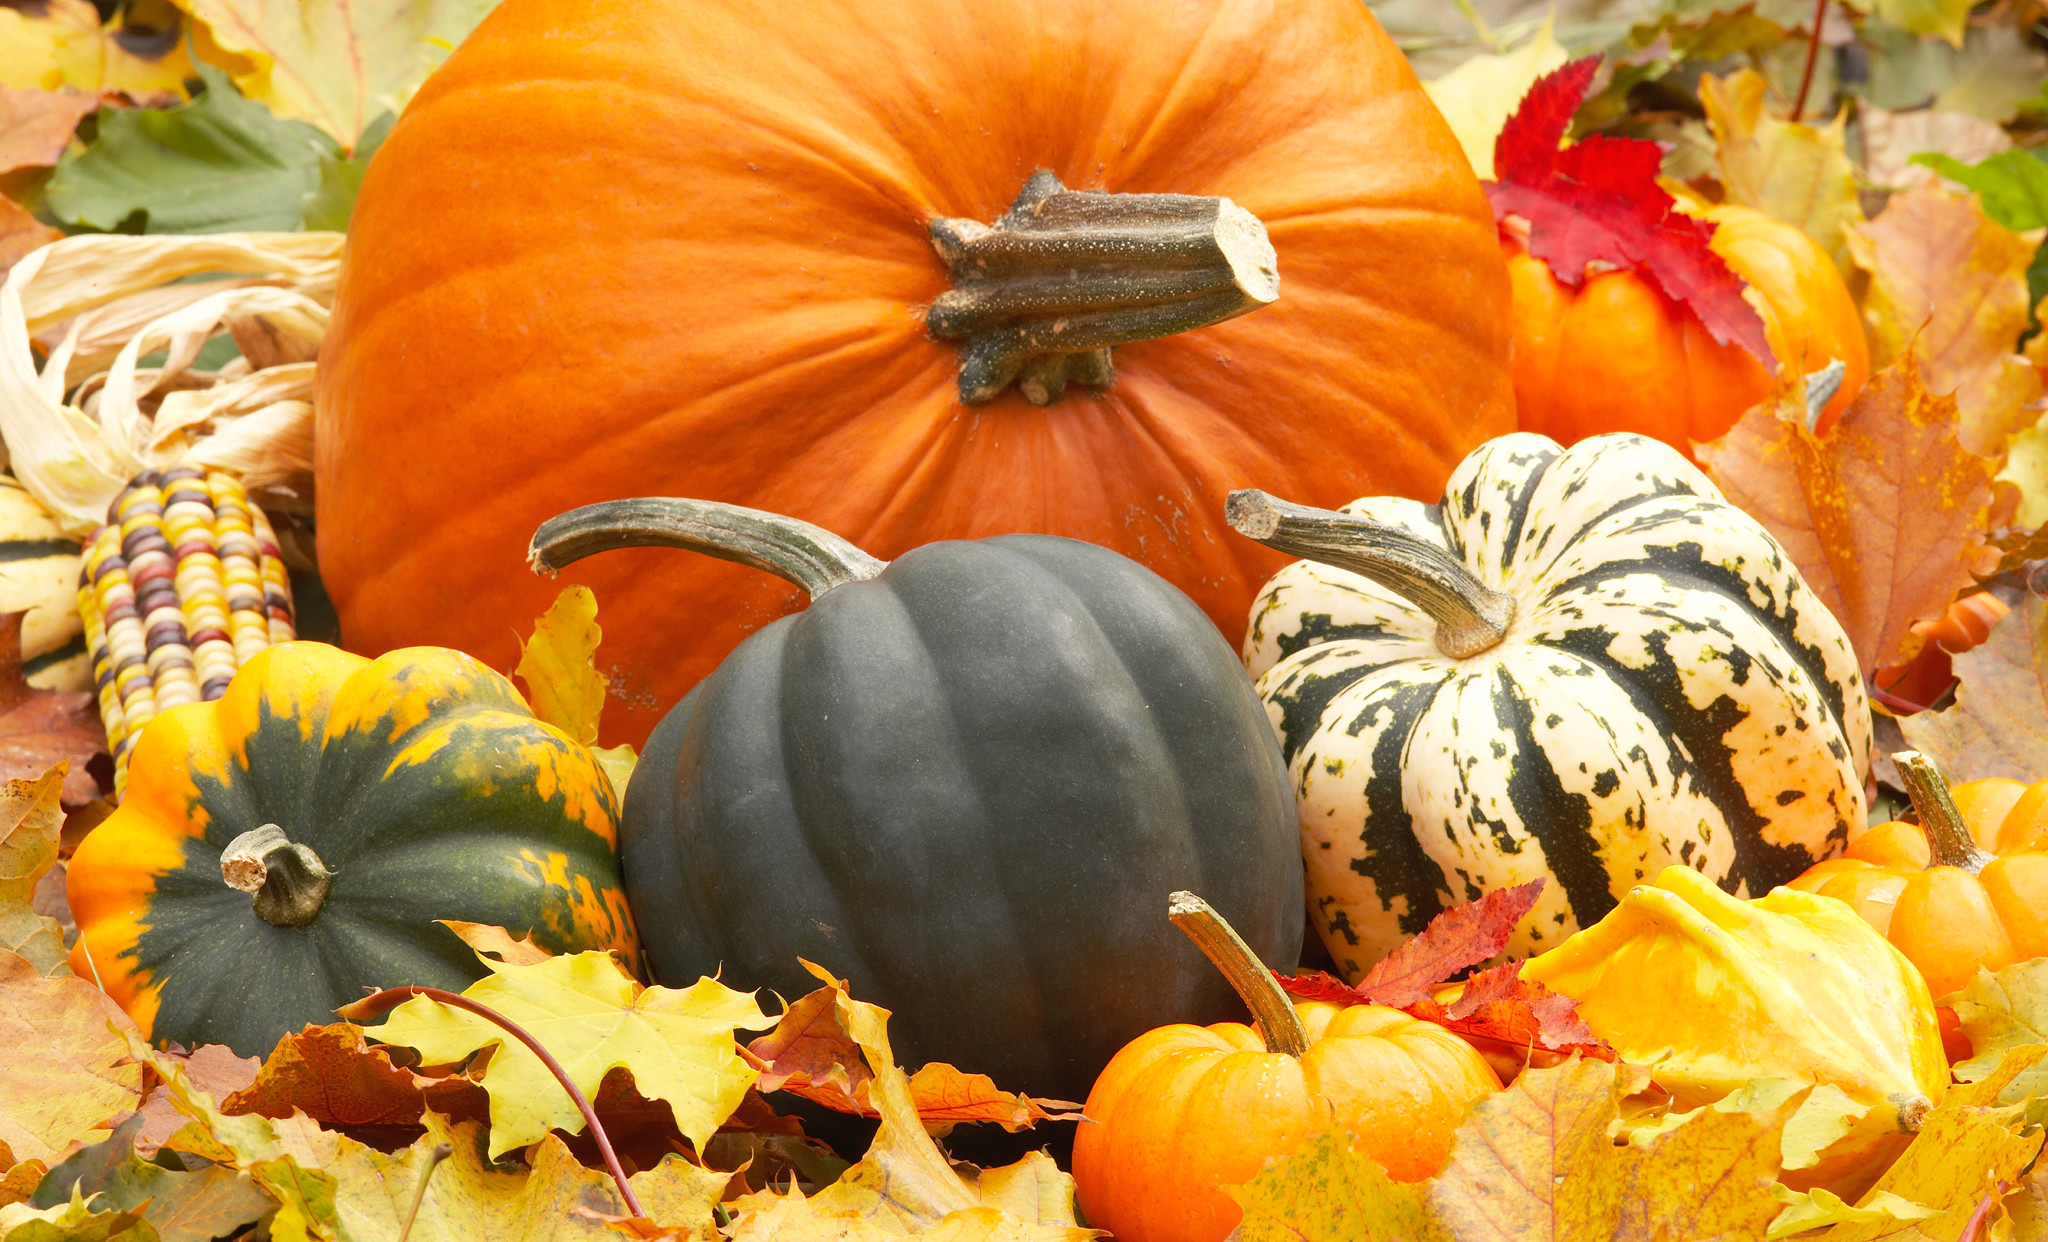 Gallery For > Fall Leaves And Pumpkins Wallpaper